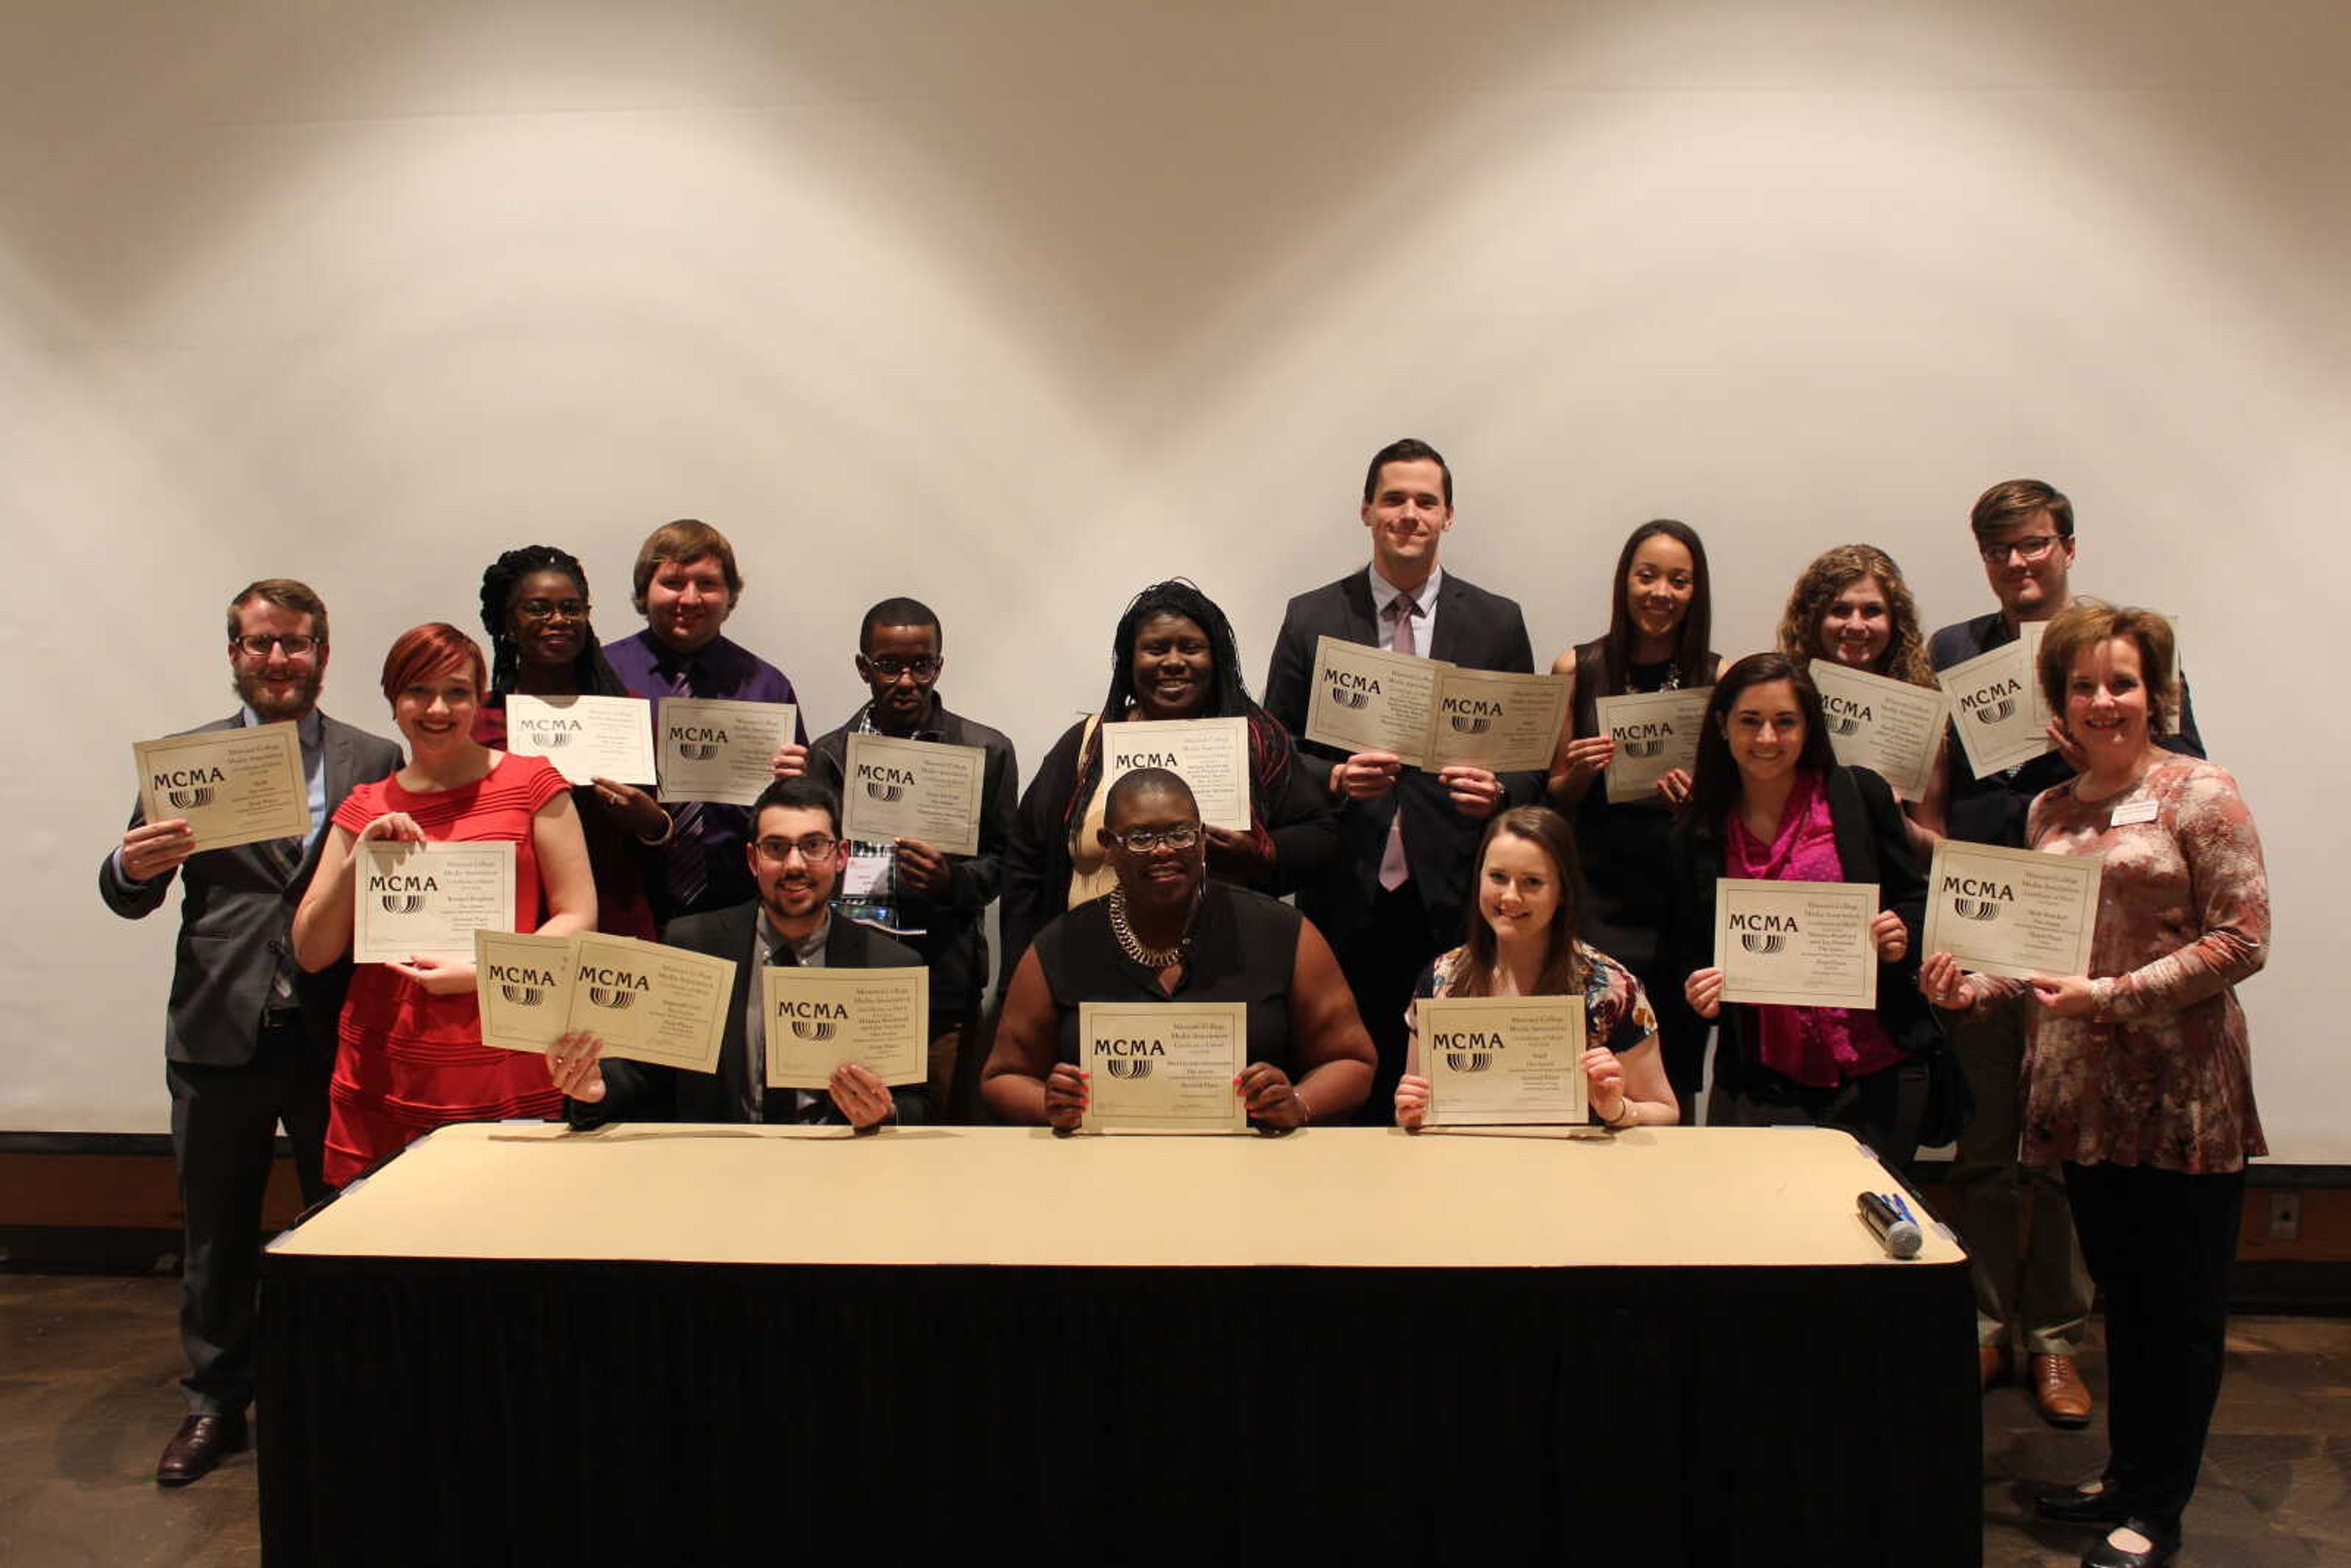 Arrow staff members and advisers pose with all 17 awards they received after the MCMA banquet on April 9.